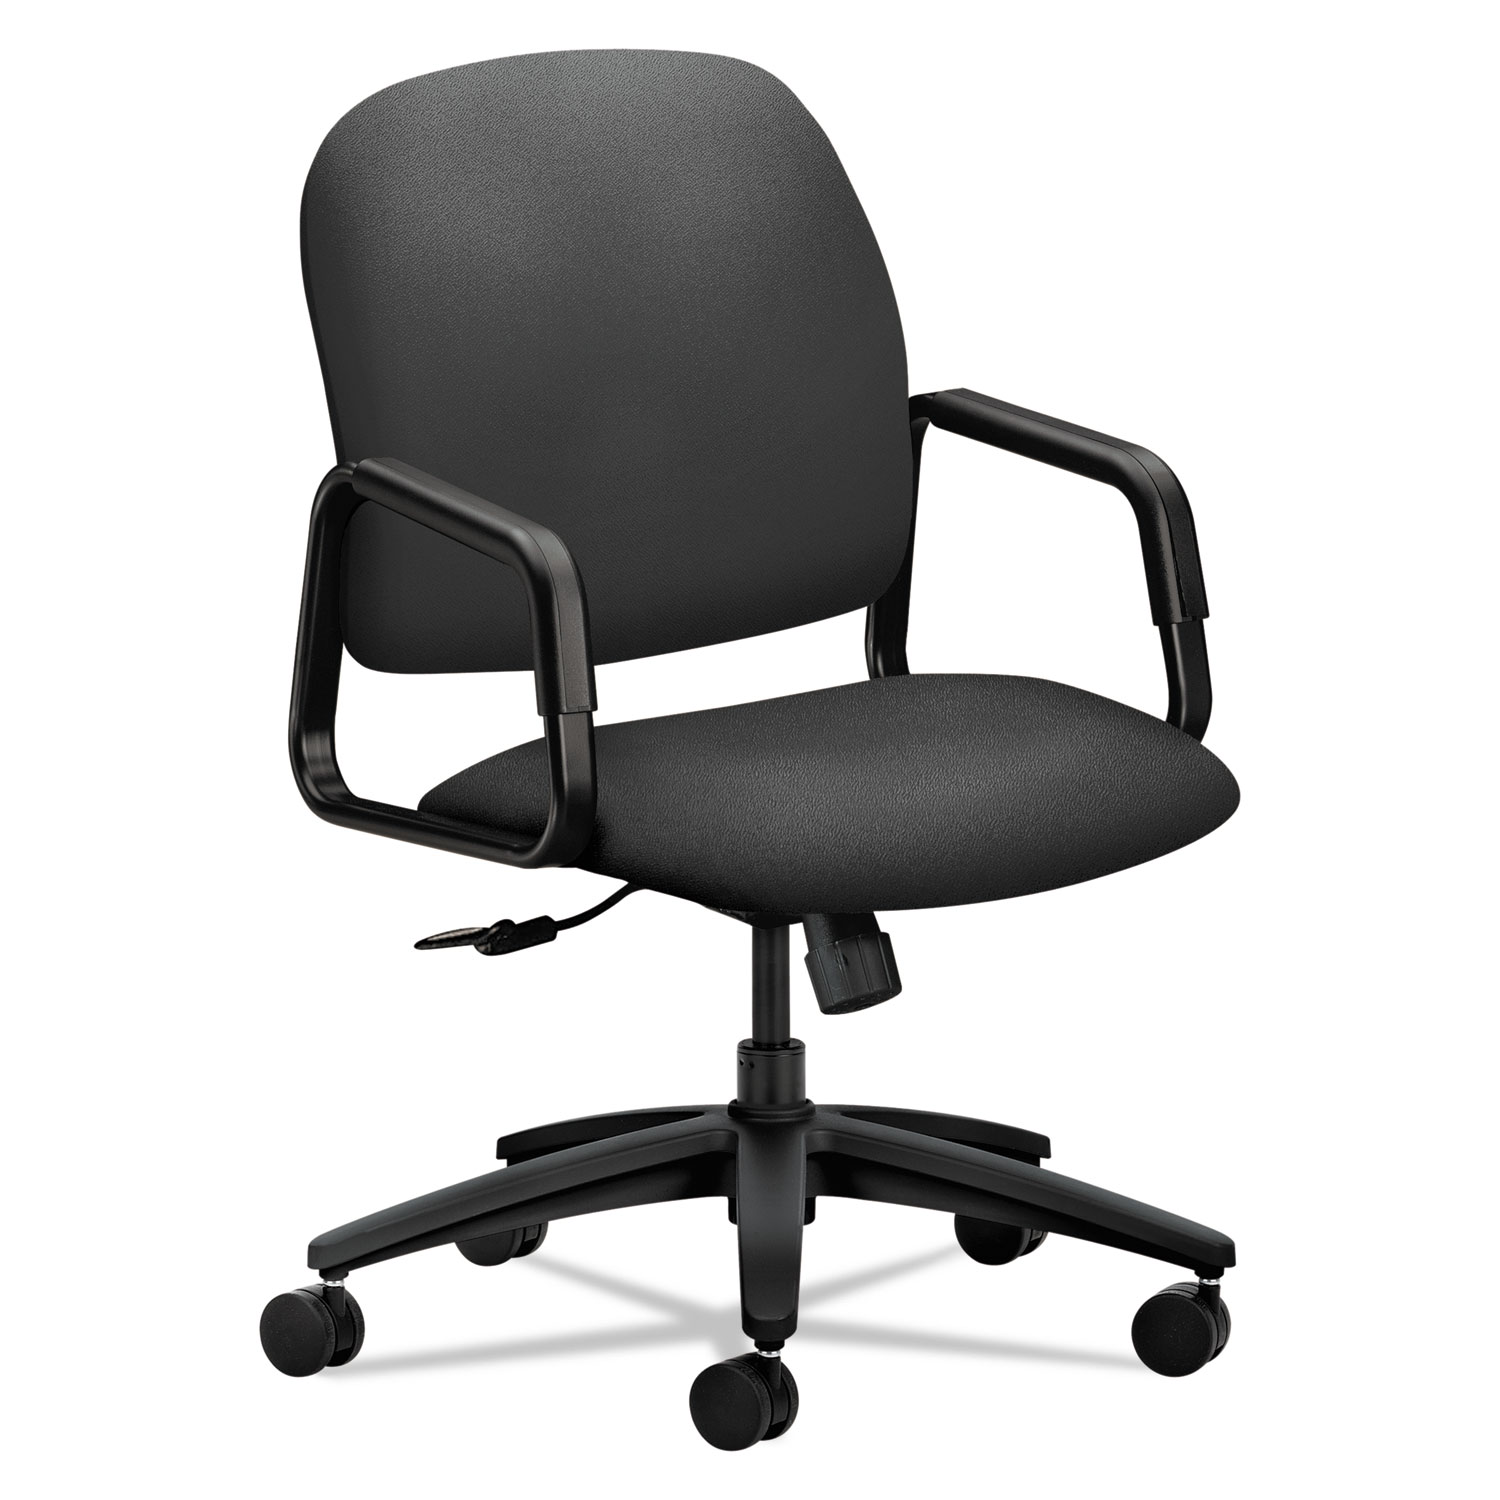  HON H4001.H.CU19.T Solutions Seating 4000 Series Executive High-Back Chair, Supports up to 250 lbs., Iron Ore Seat, Iron Ore Back, Black Base (HON4001CU19T) 